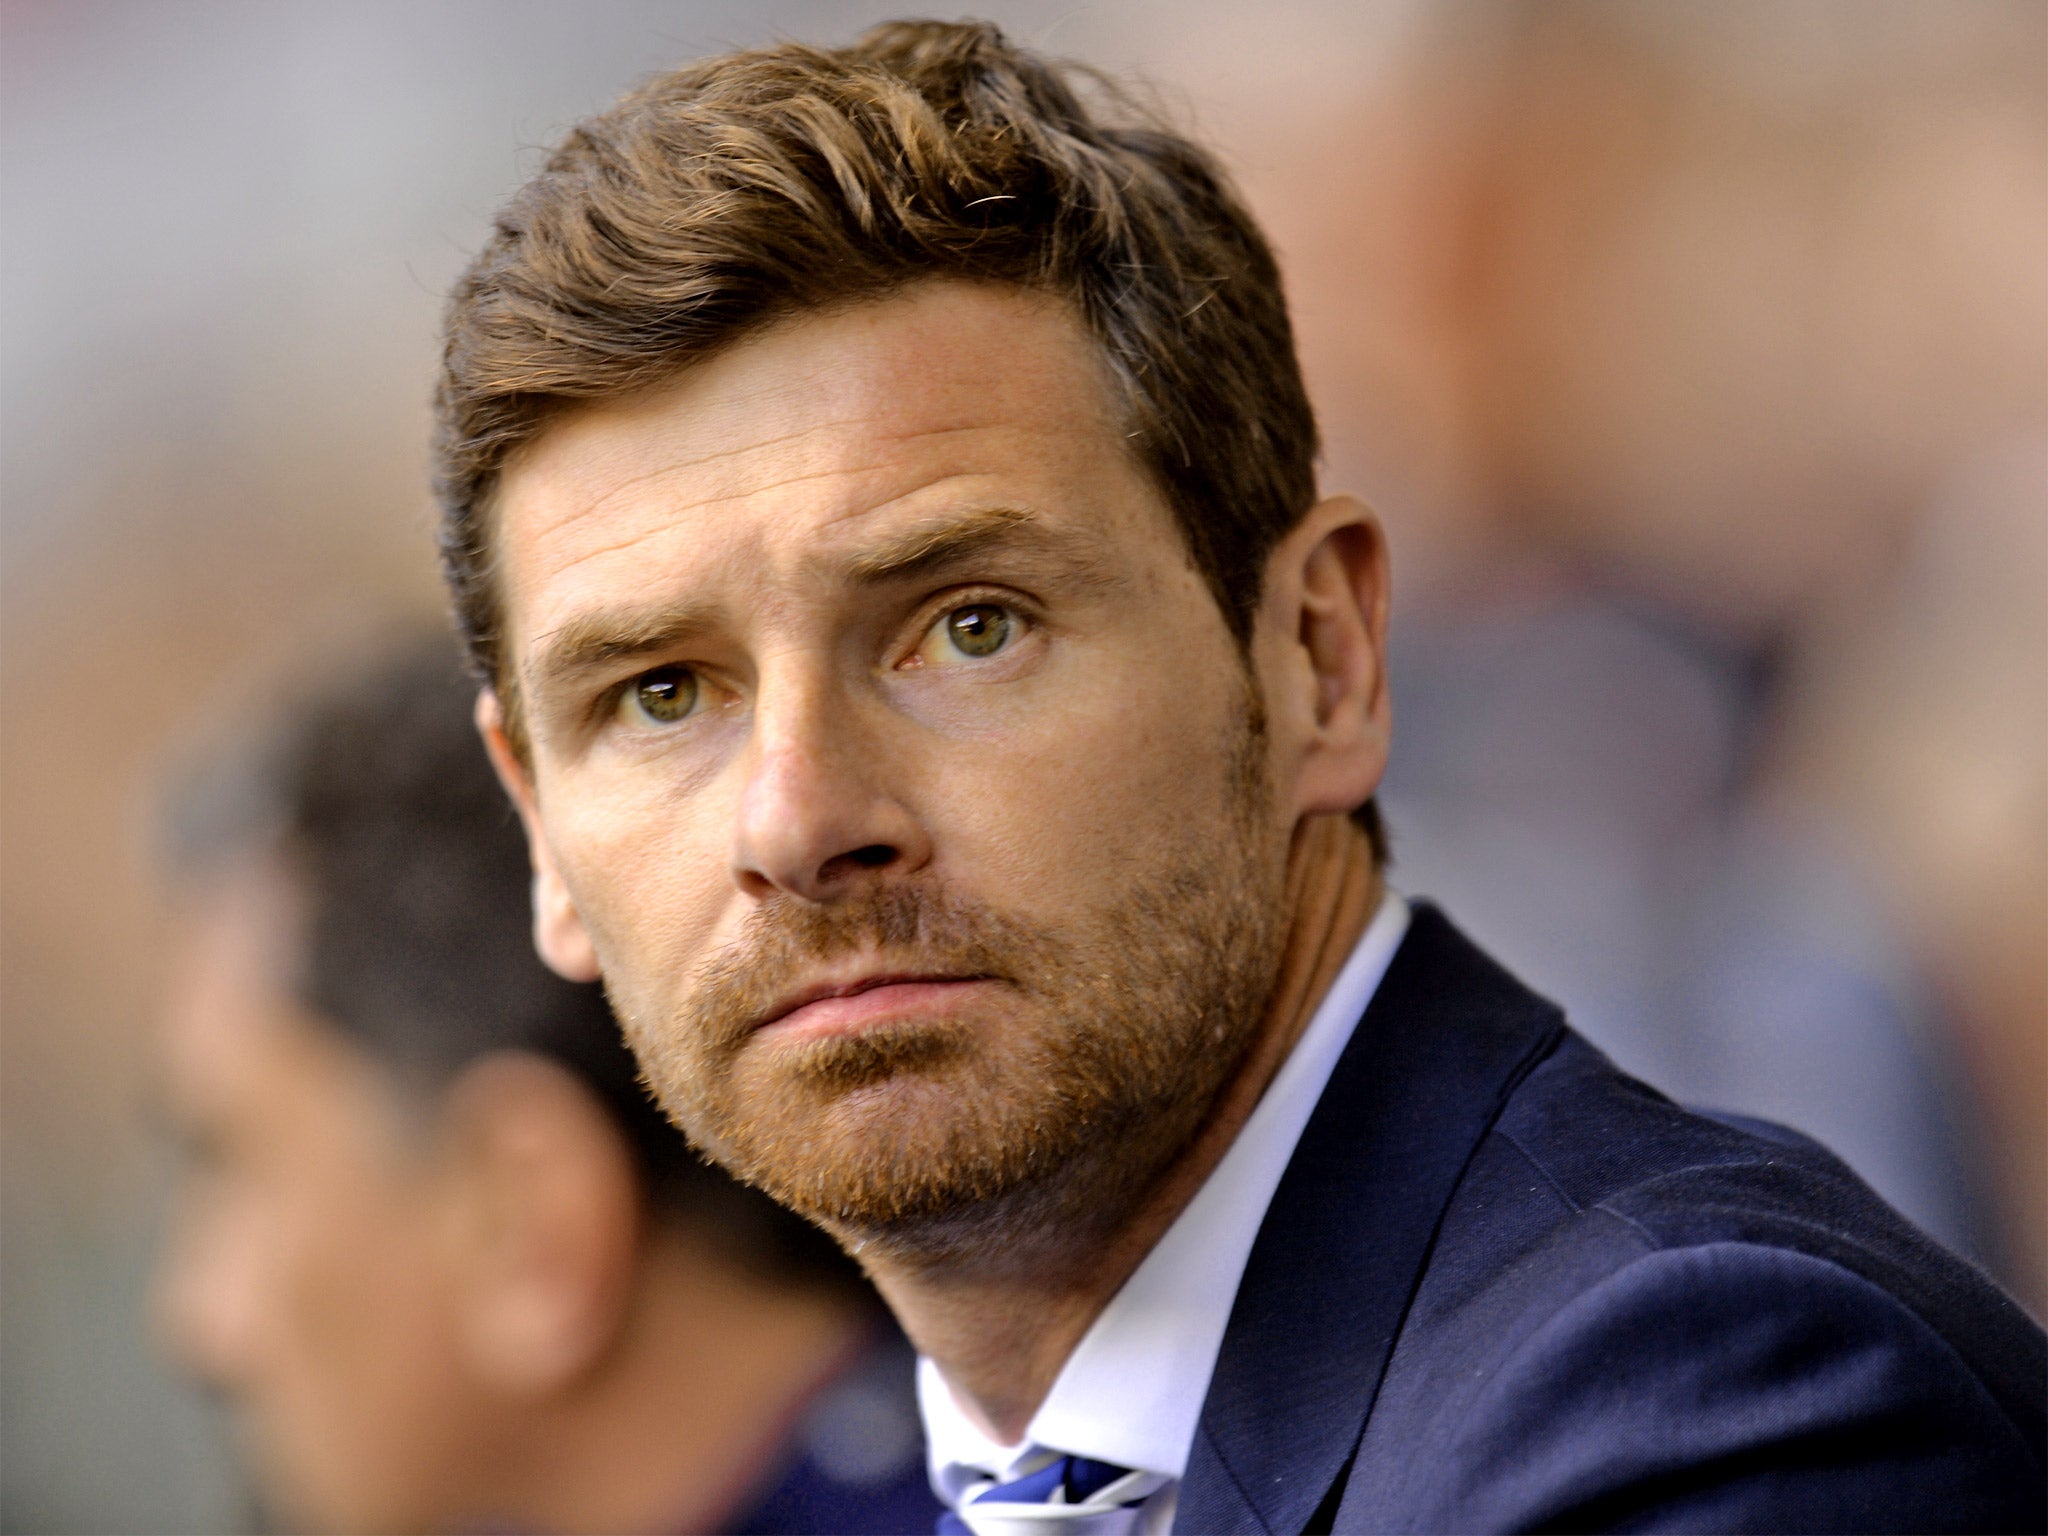 Villas-Boas was sacked by Chelsea after three wins in 12 games